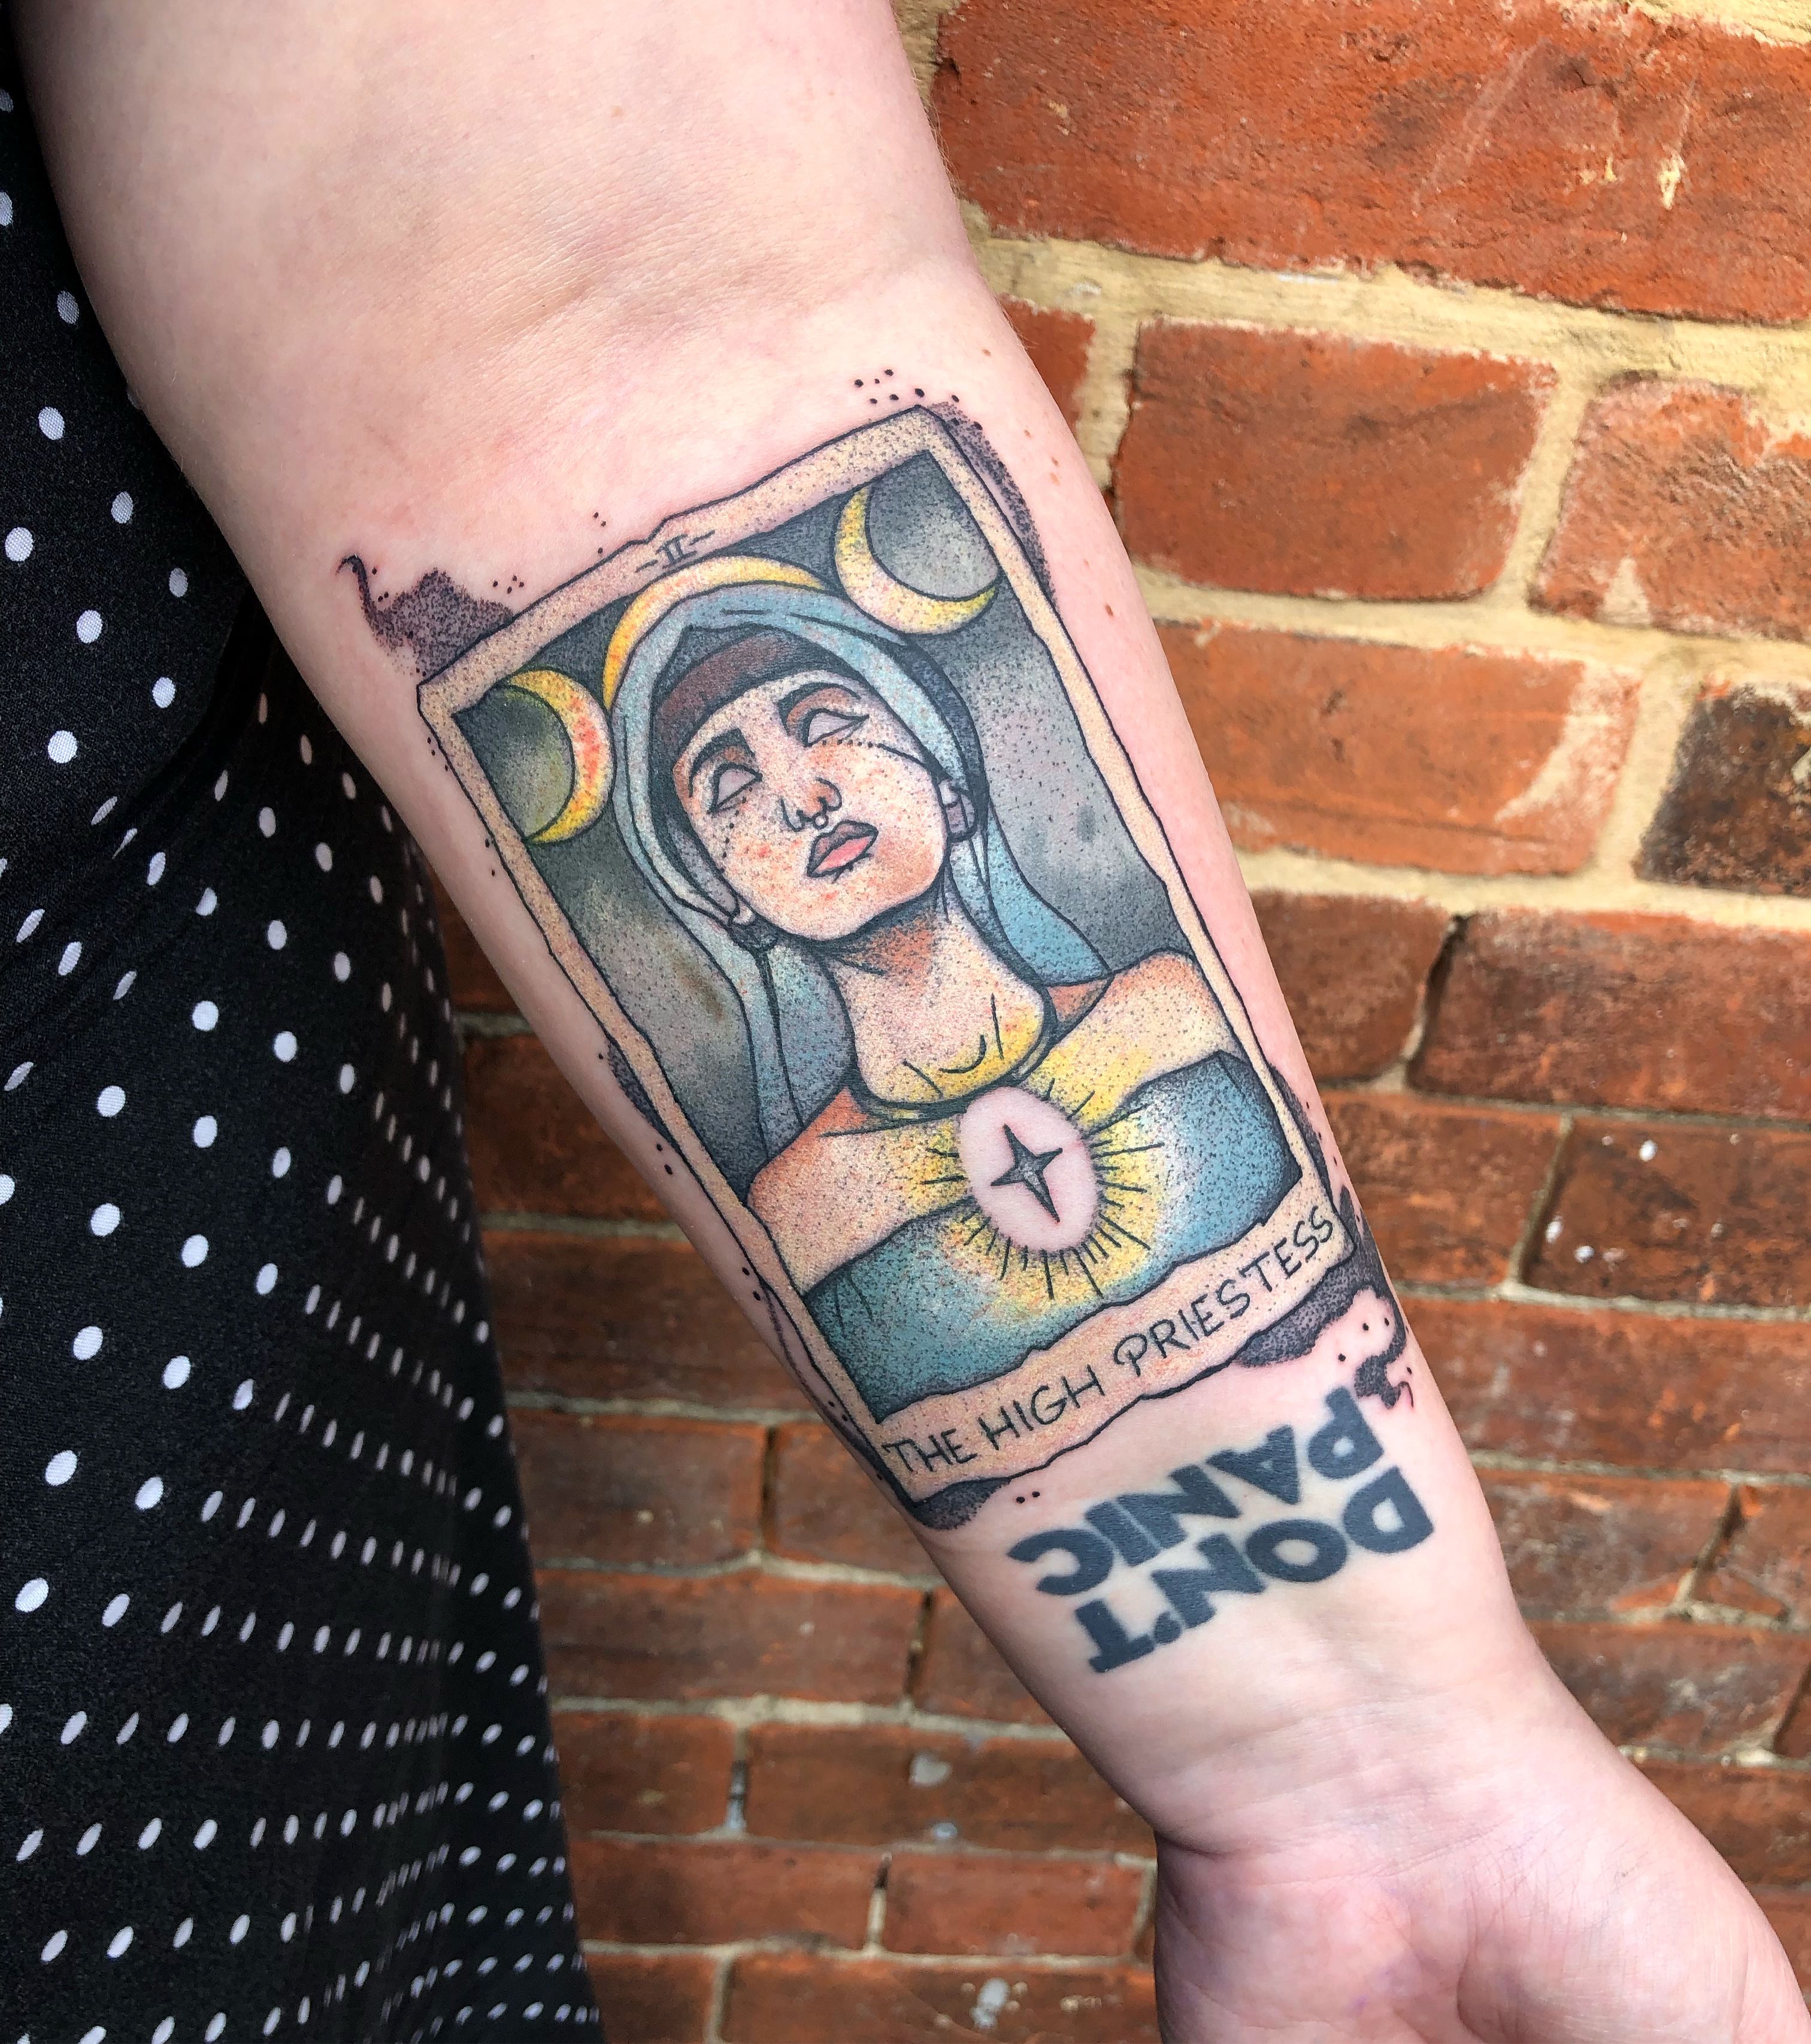 The High Priestess tarot card tattoo done by Eryn at Bed of Roses tattoo in  Tampa Florida her instagram is swampblossom  rtattoo